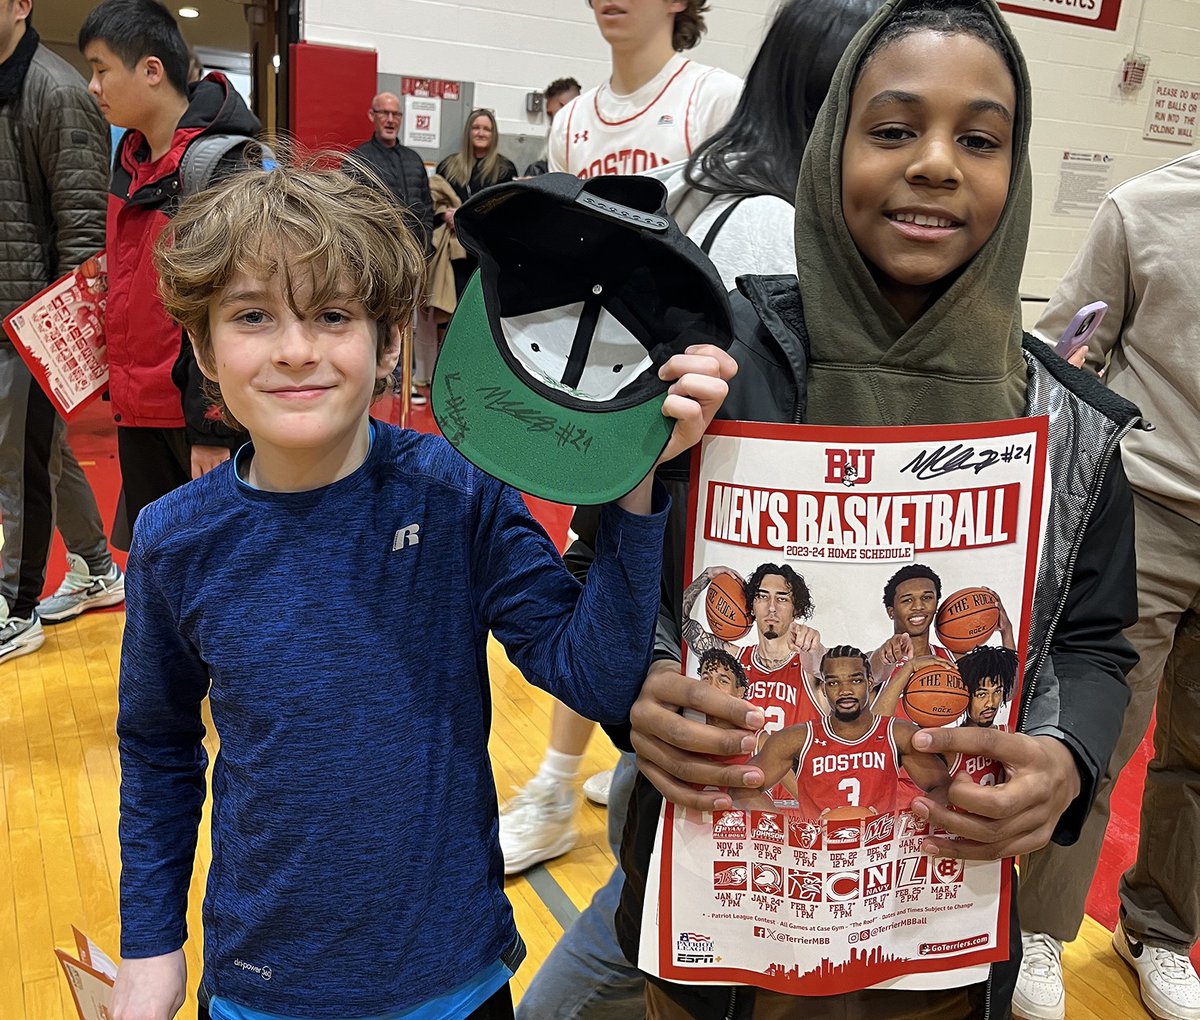 BGCD members had the opportunity to attend a @TerrierMBB Game! 🏀 Members also had a chance to meet the players afterwards! The BU Men's Basketball Team has been a longtime BGCD program partner, hosting monthly Clinics and support our Challenger Sports program. #WeAreDorchester